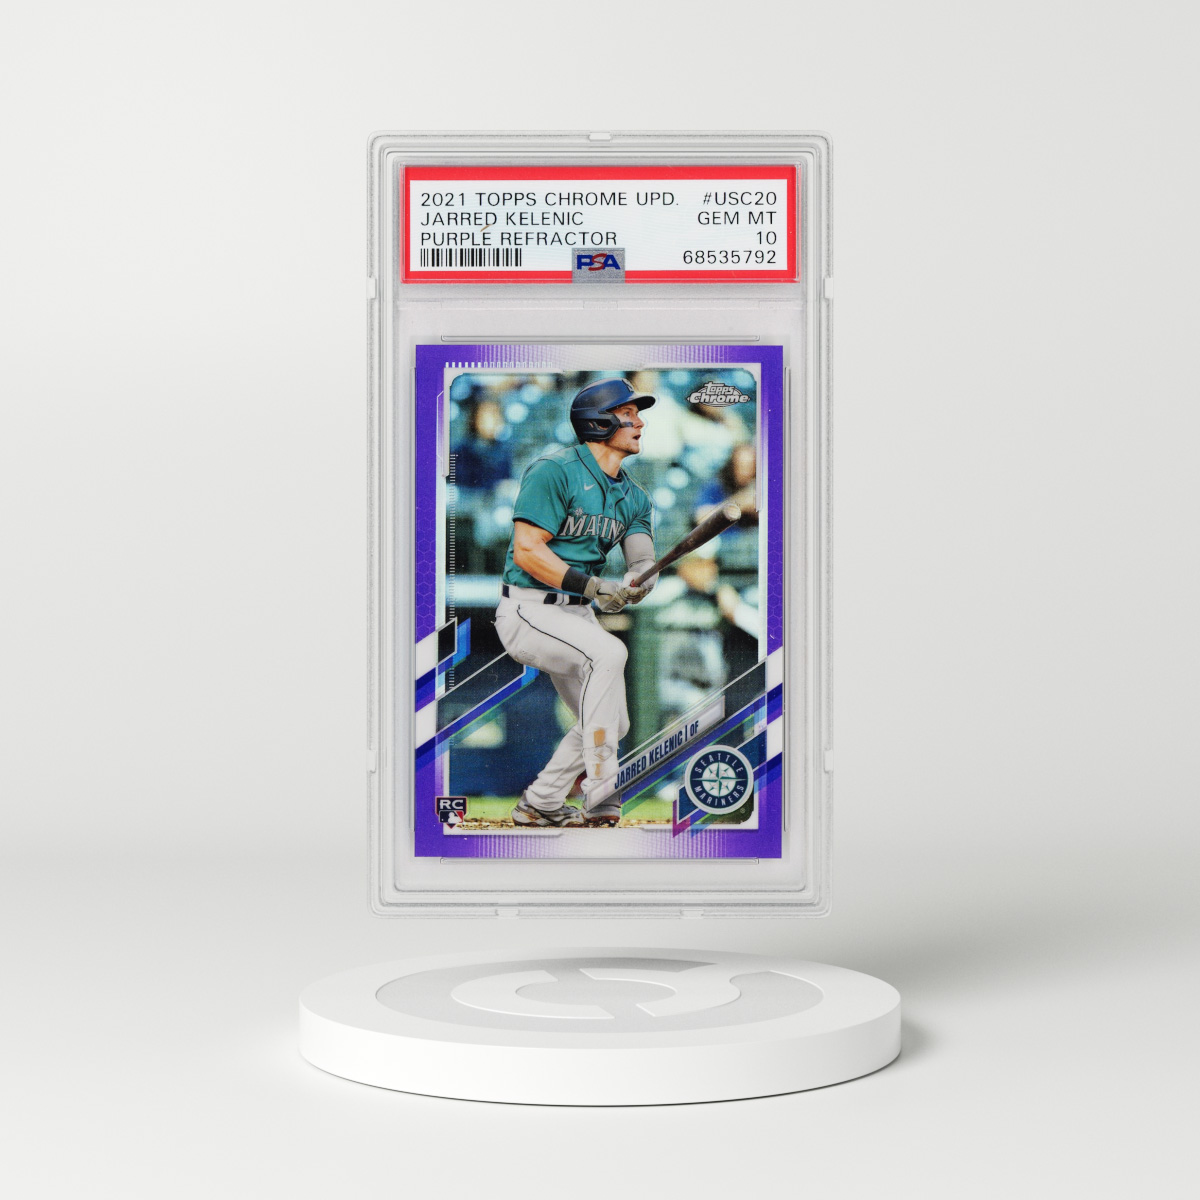 Topps Mlb Topps Project70 Card 282